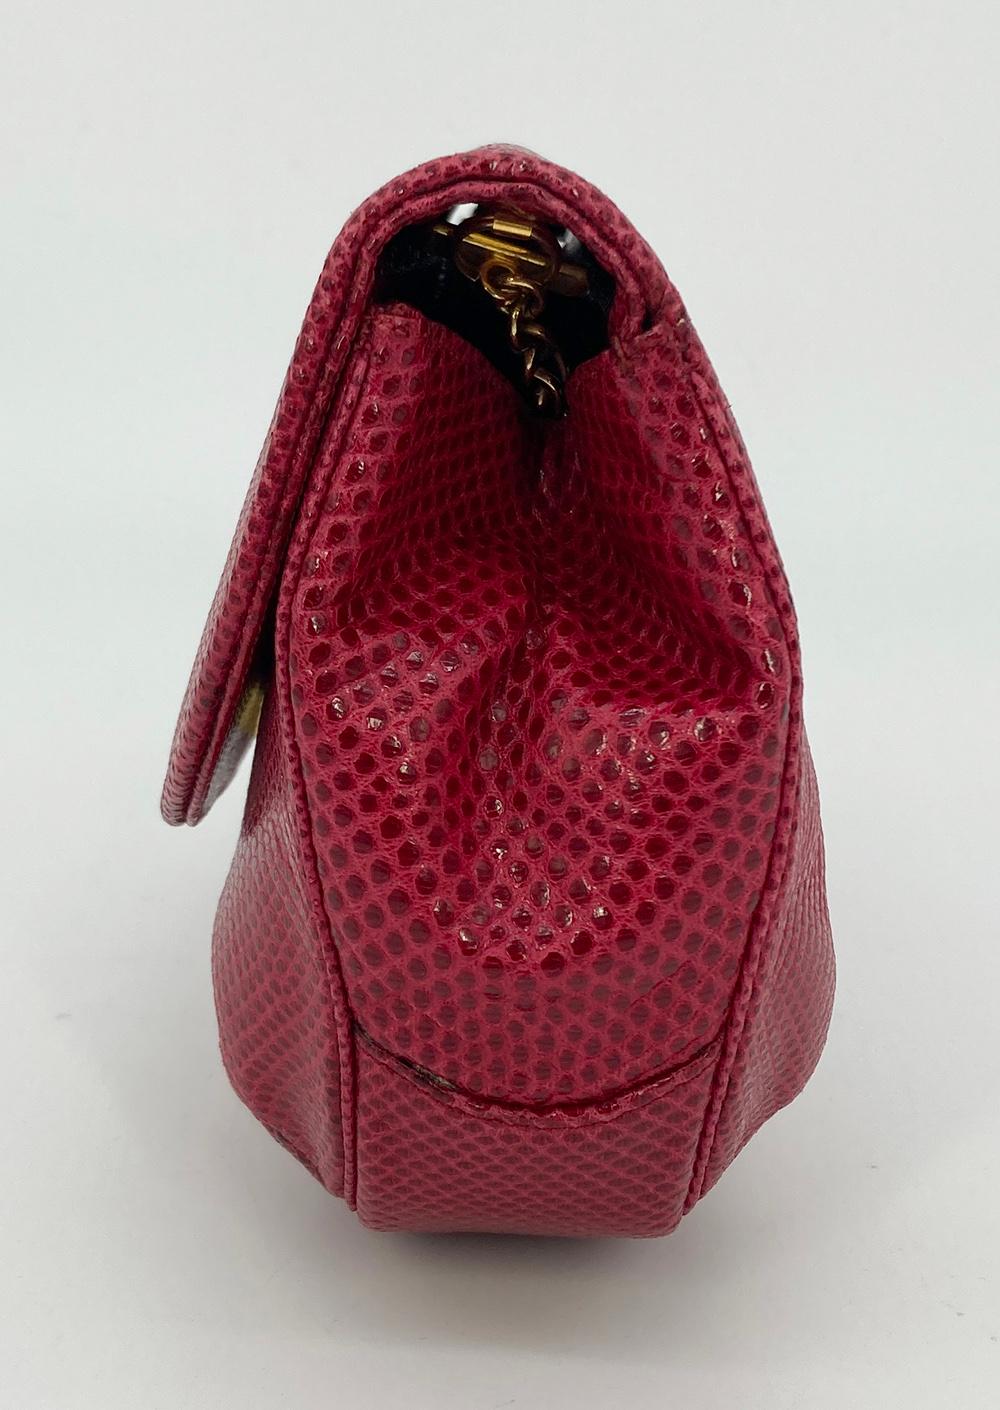 Judith Leiber Red Lizard Tassel Charm Strap Clutch Shoulder Bag in fair vintage condition. Red lizard leather trimmed with matching red tassel detail and gold hardware. Interchangeable shoulder straps included. One is red lizard leather while the